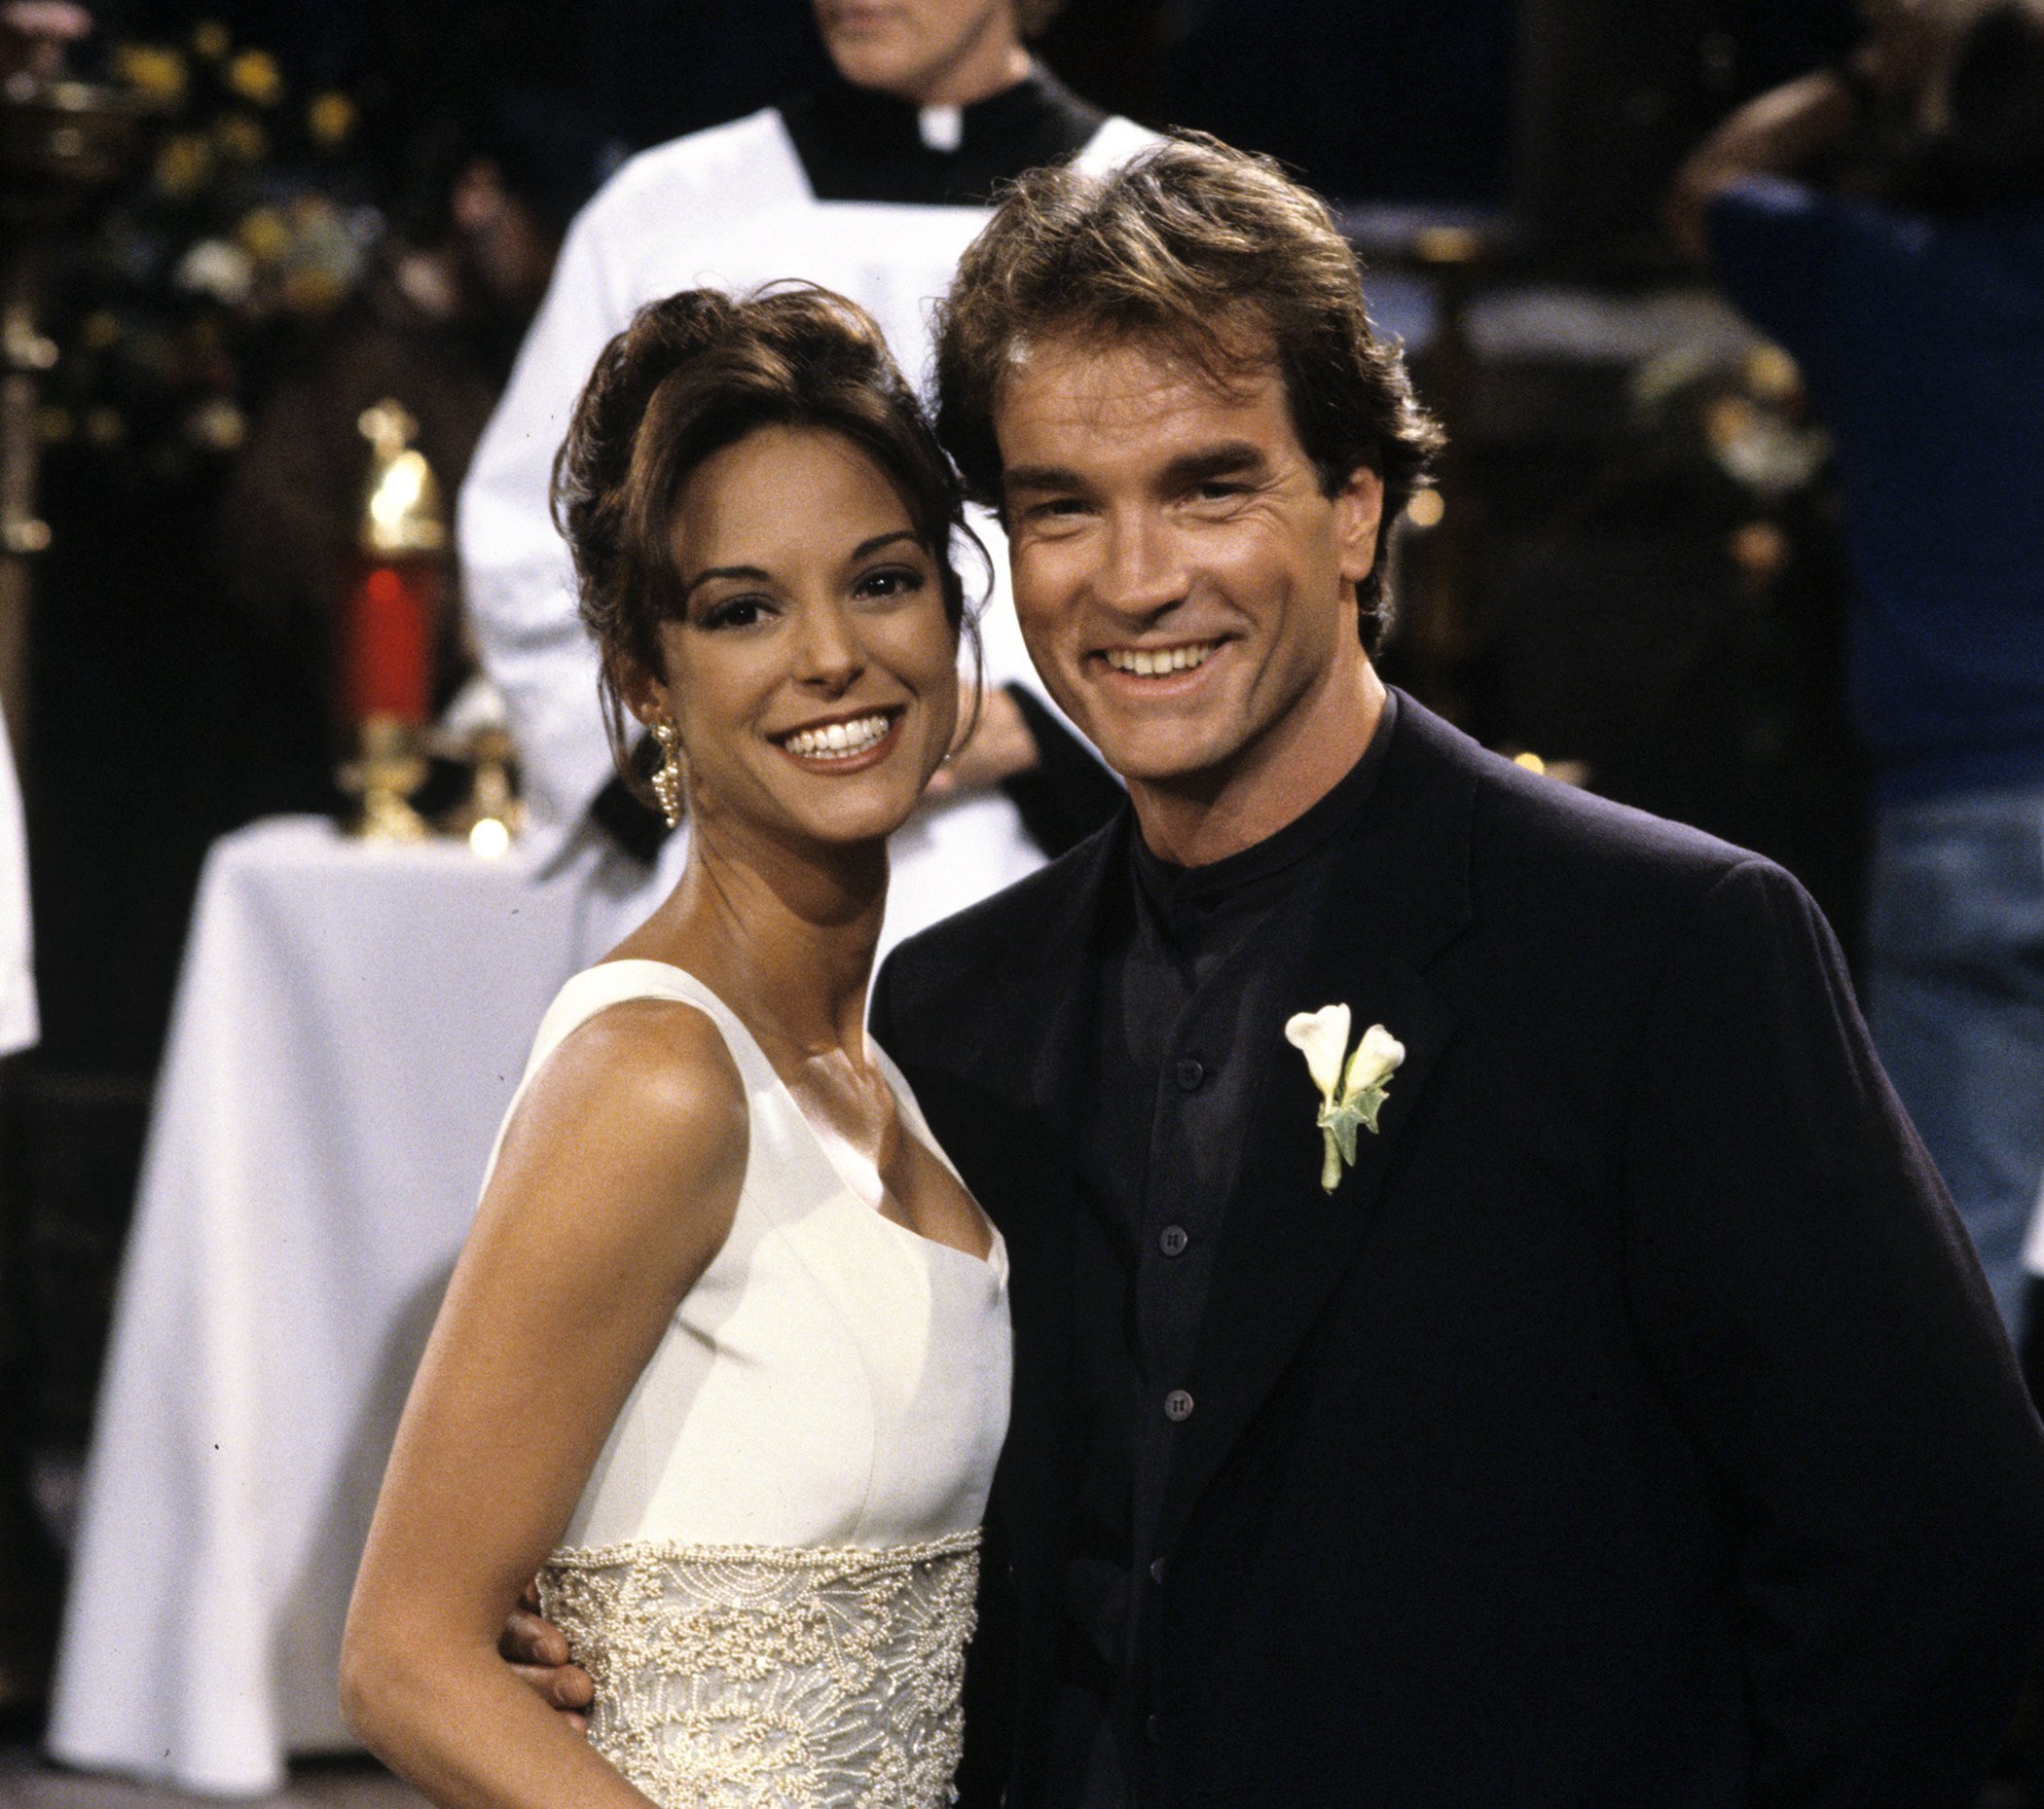  Eva LaRue and John Callahan during their 1995 wedding scene of the TV show "All My Children." | Photo: Getty Images